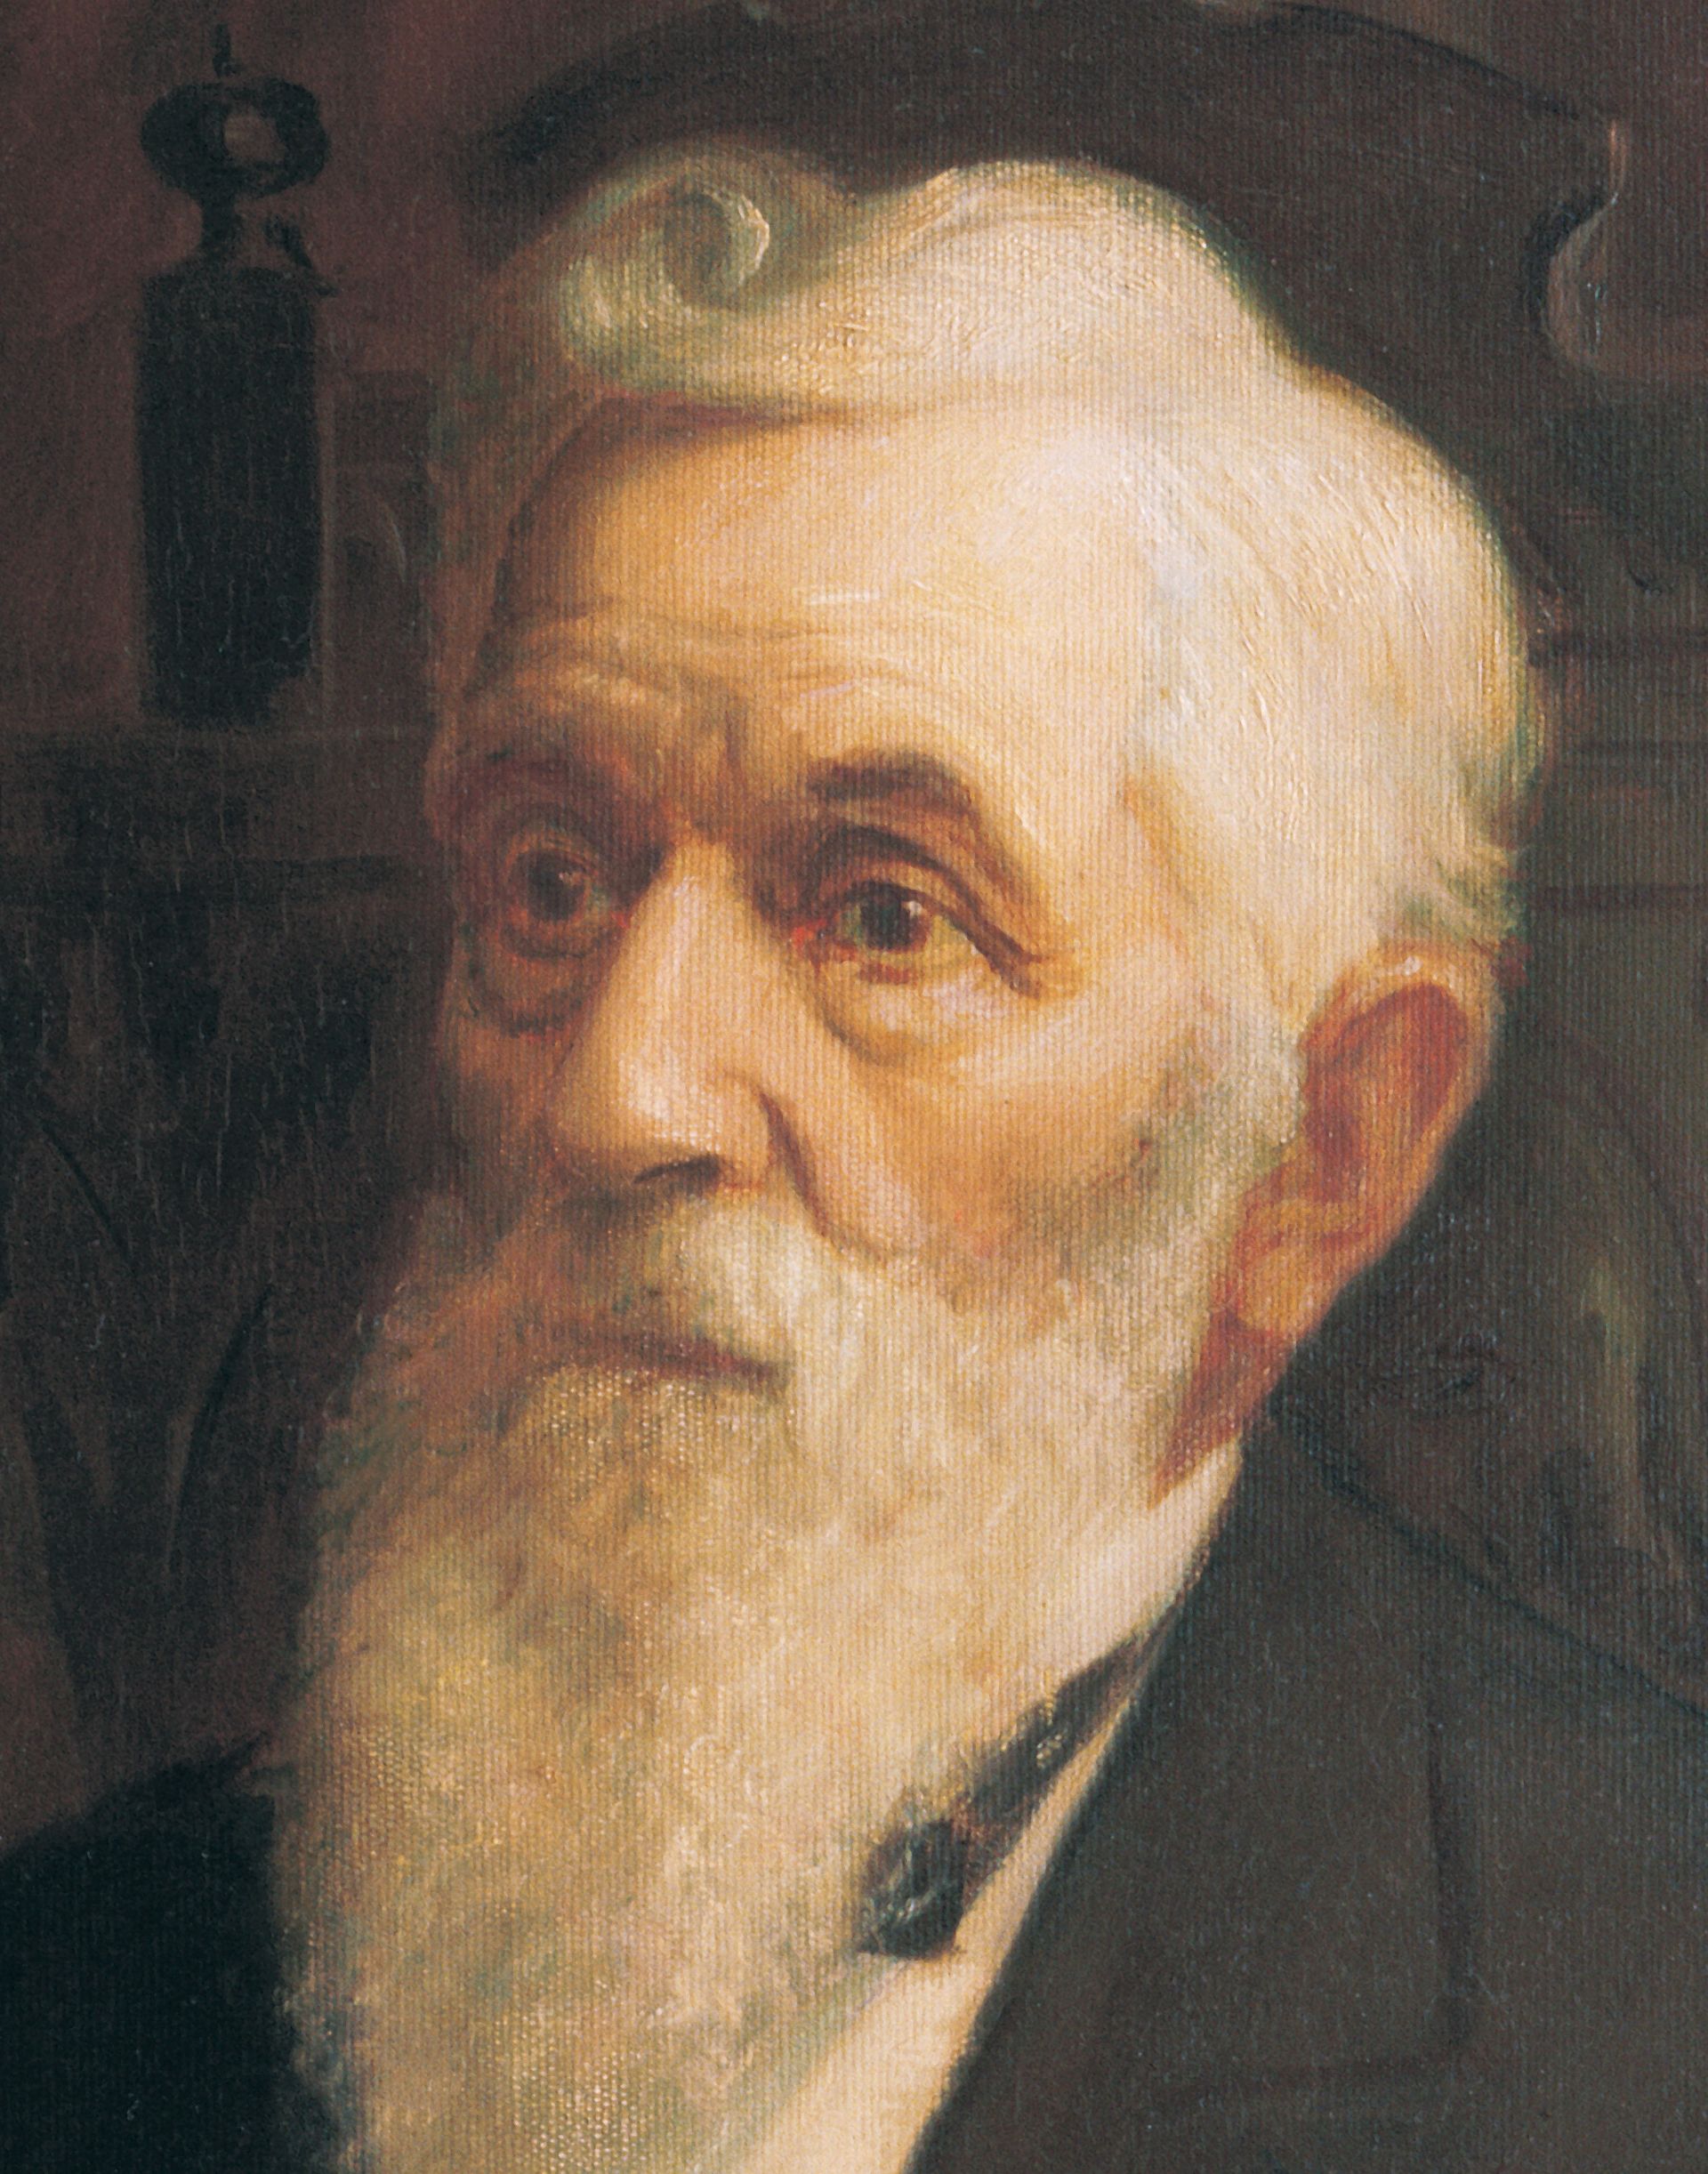 Lorenzo Snow, by Lewis A. Ramsey; GAK 510; GAB 126; Primary manual 3–18; Our Heritage, 103–4. President Lorenzo Snow served as the fifth President of the Church from 1898 to 1901.